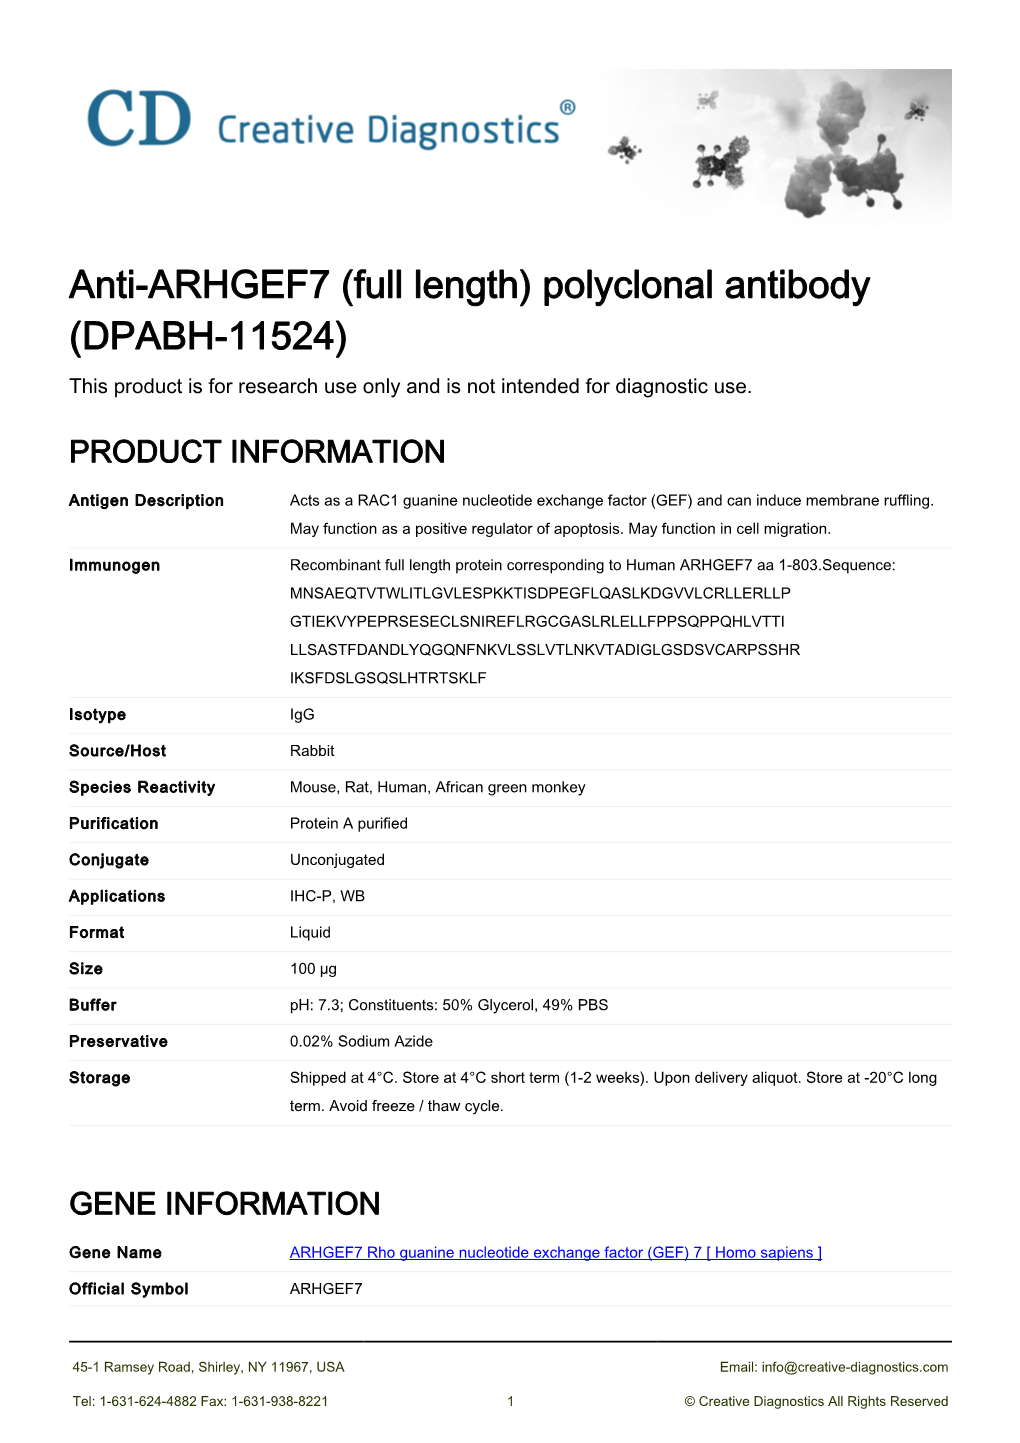 Anti-ARHGEF7 (Full Length) Polyclonal Antibody (DPABH-11524) This Product Is for Research Use Only and Is Not Intended for Diagnostic Use